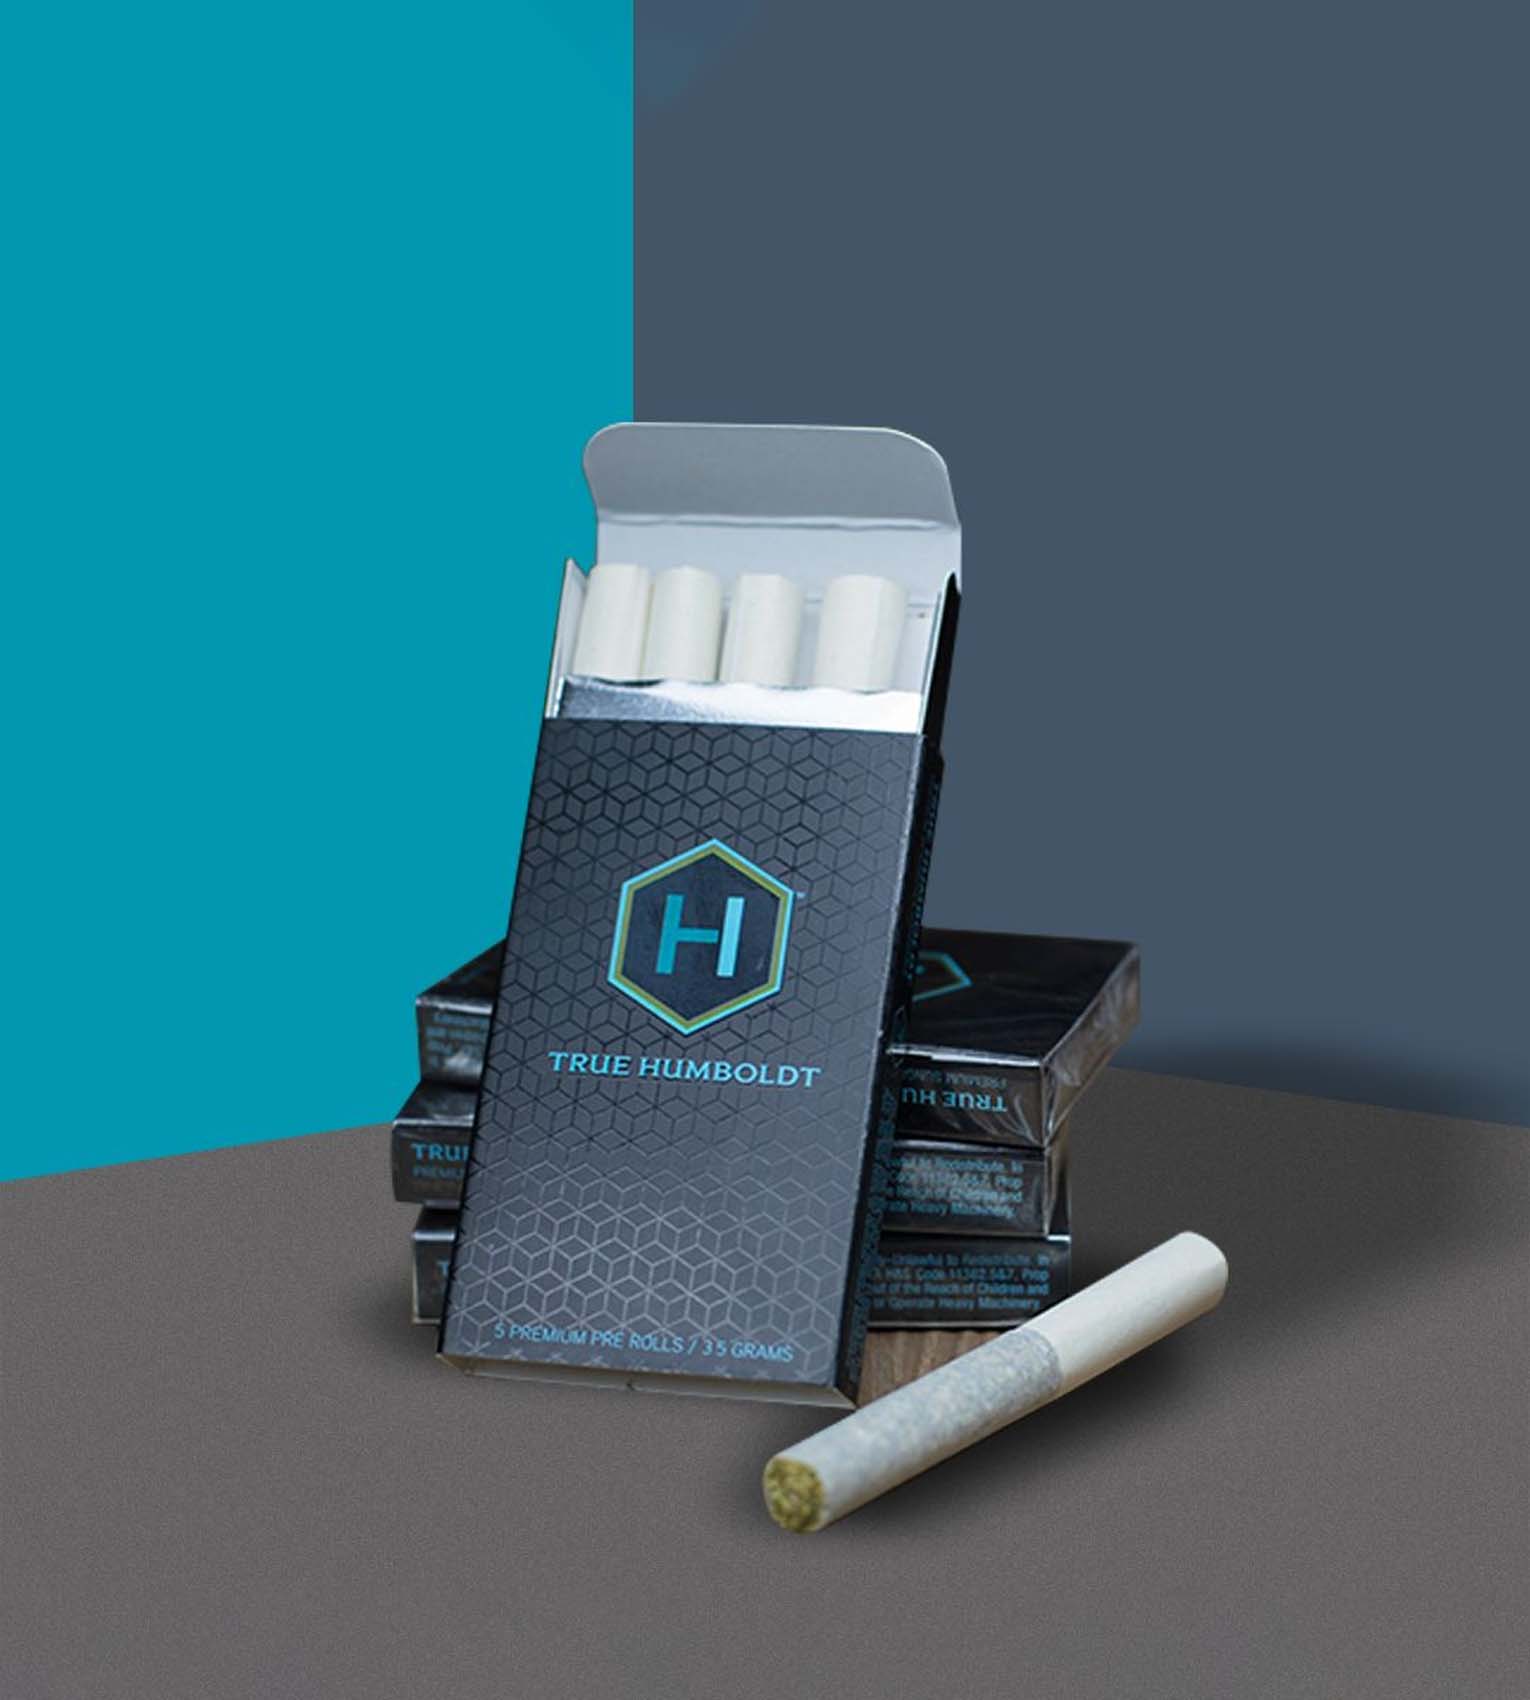  Cigarette Packaging Boxes